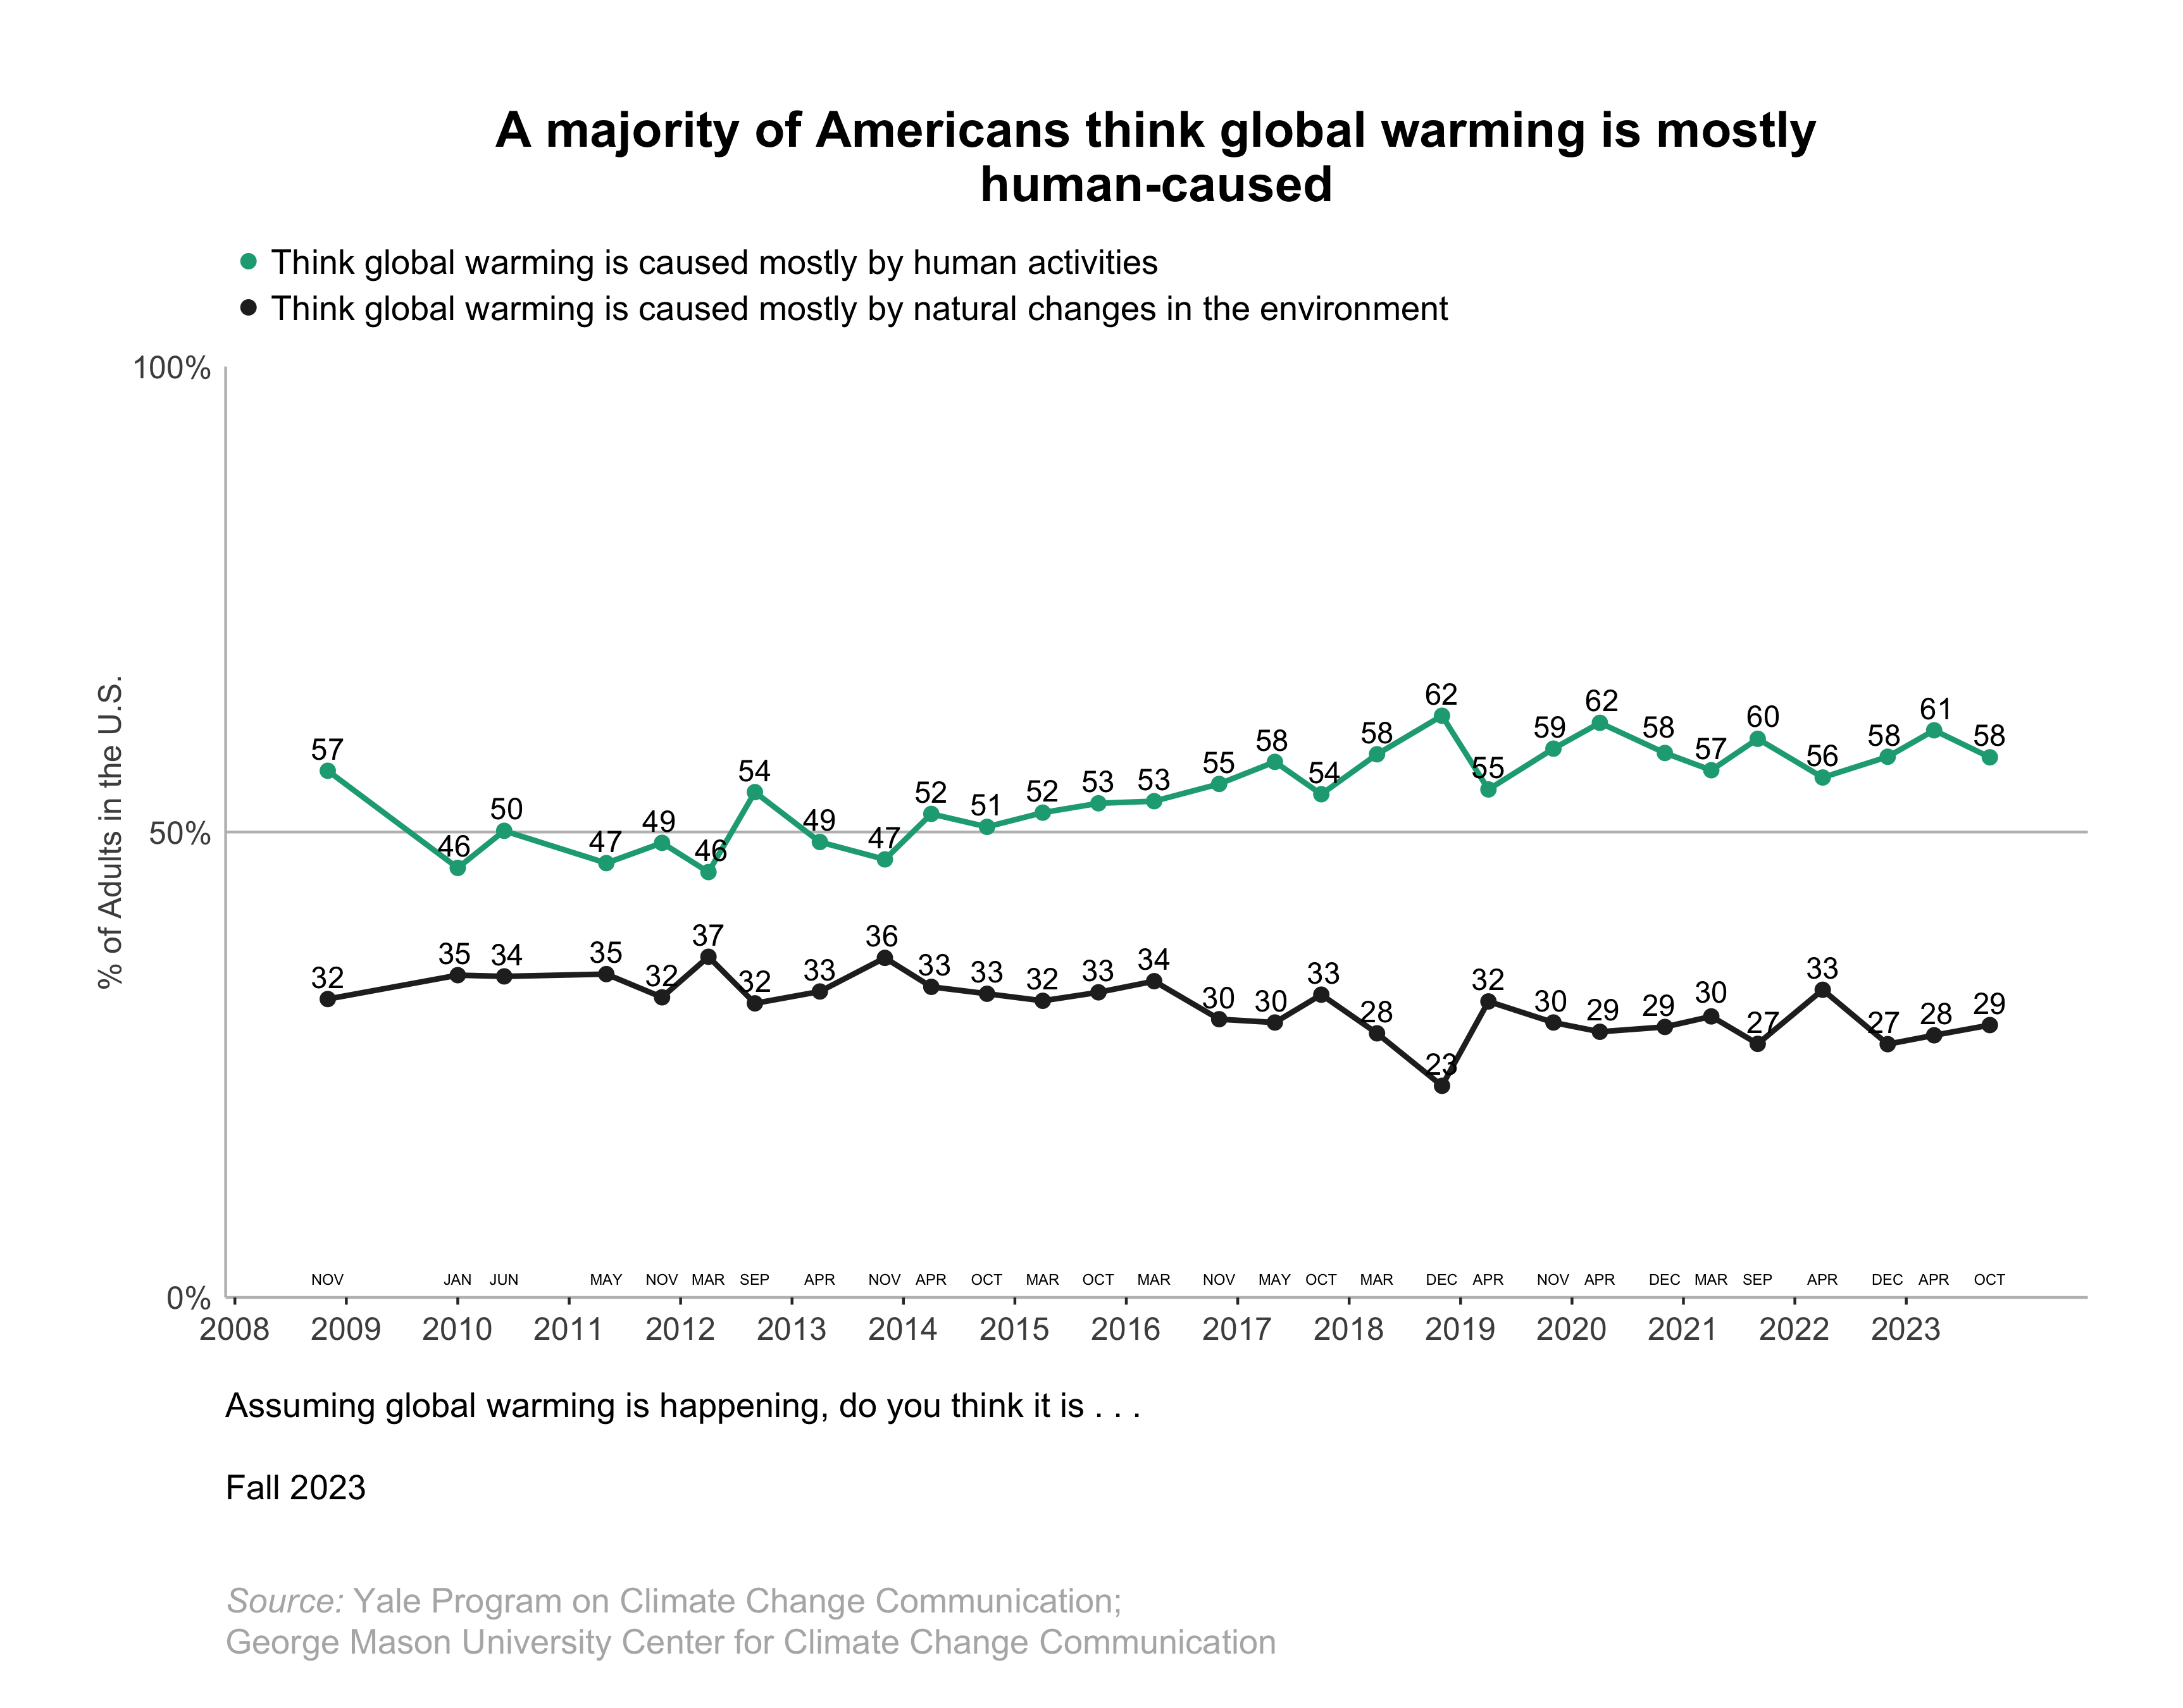 This line graph shows the percentage of Americans over time since 2008 who think global warming is mostly human-caused or mostly caused by natural changes in the environment. A majority of Americans think global warming is mostly human-caused. Data: Climate Change in the American Mind, Fall 2023. Refer to the data tables in Appendix 1 of the report for all percentages.